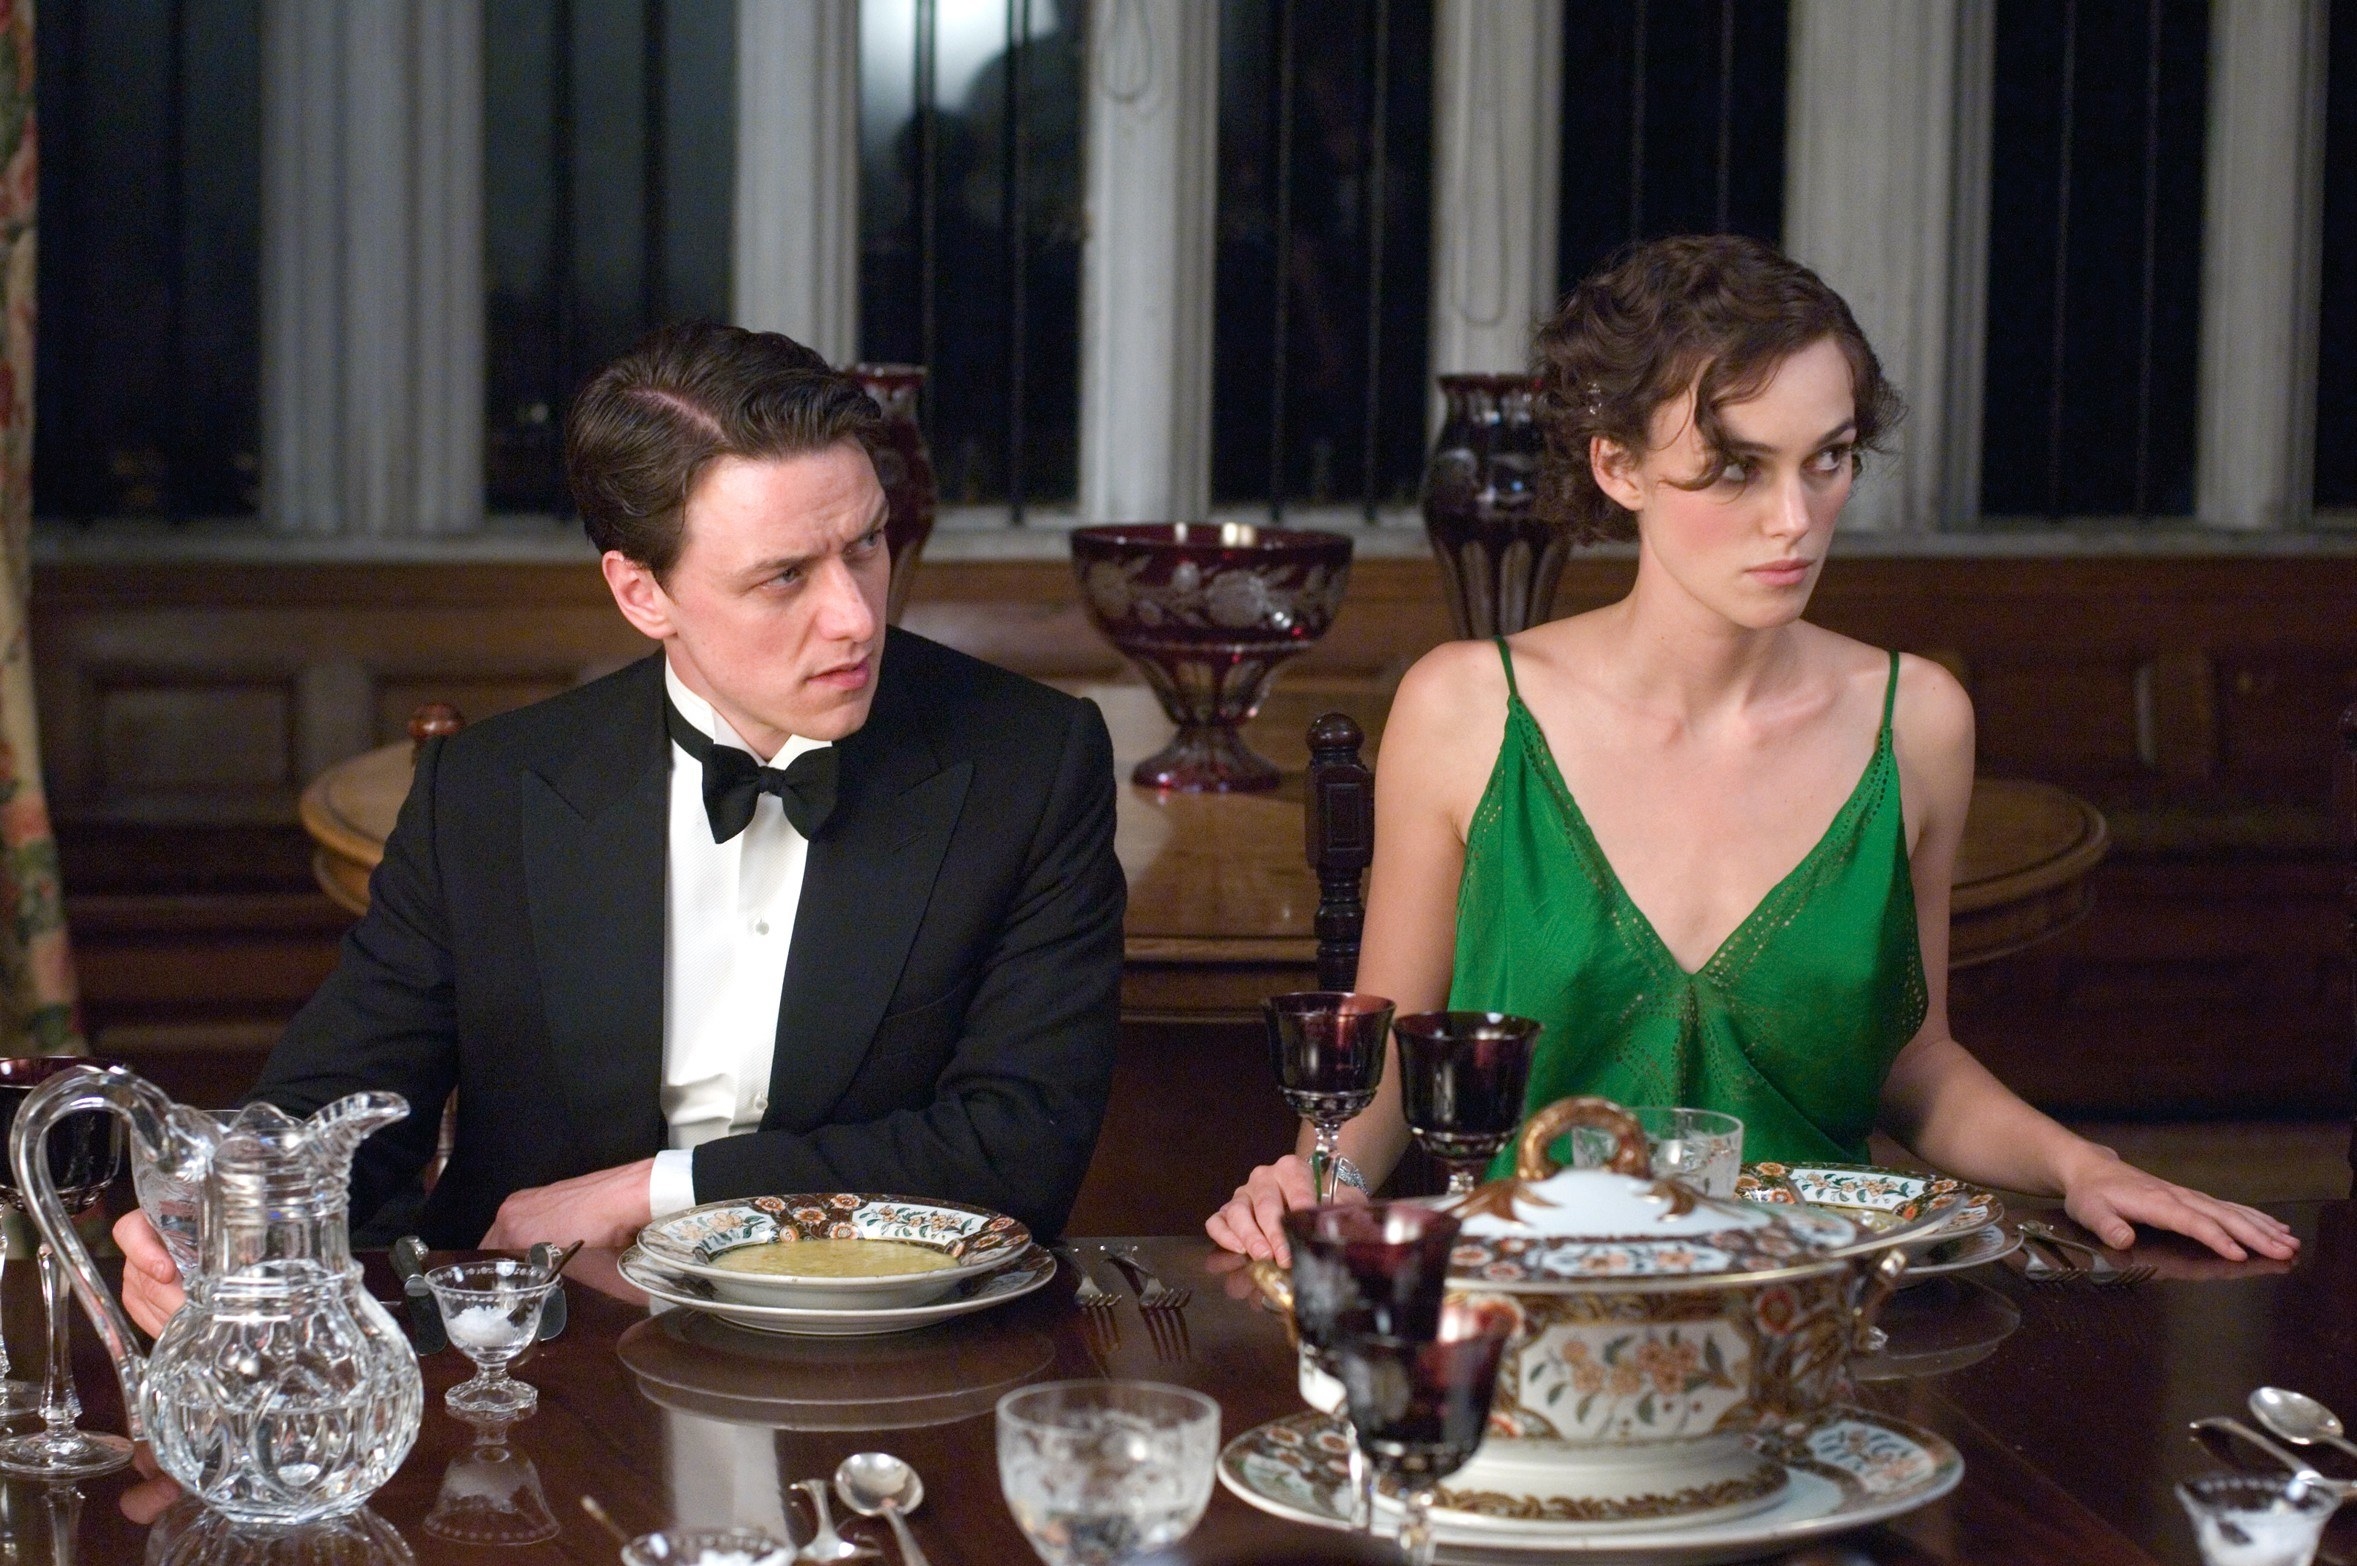 James McAvoy and Keira Knightley sit at a dinner table